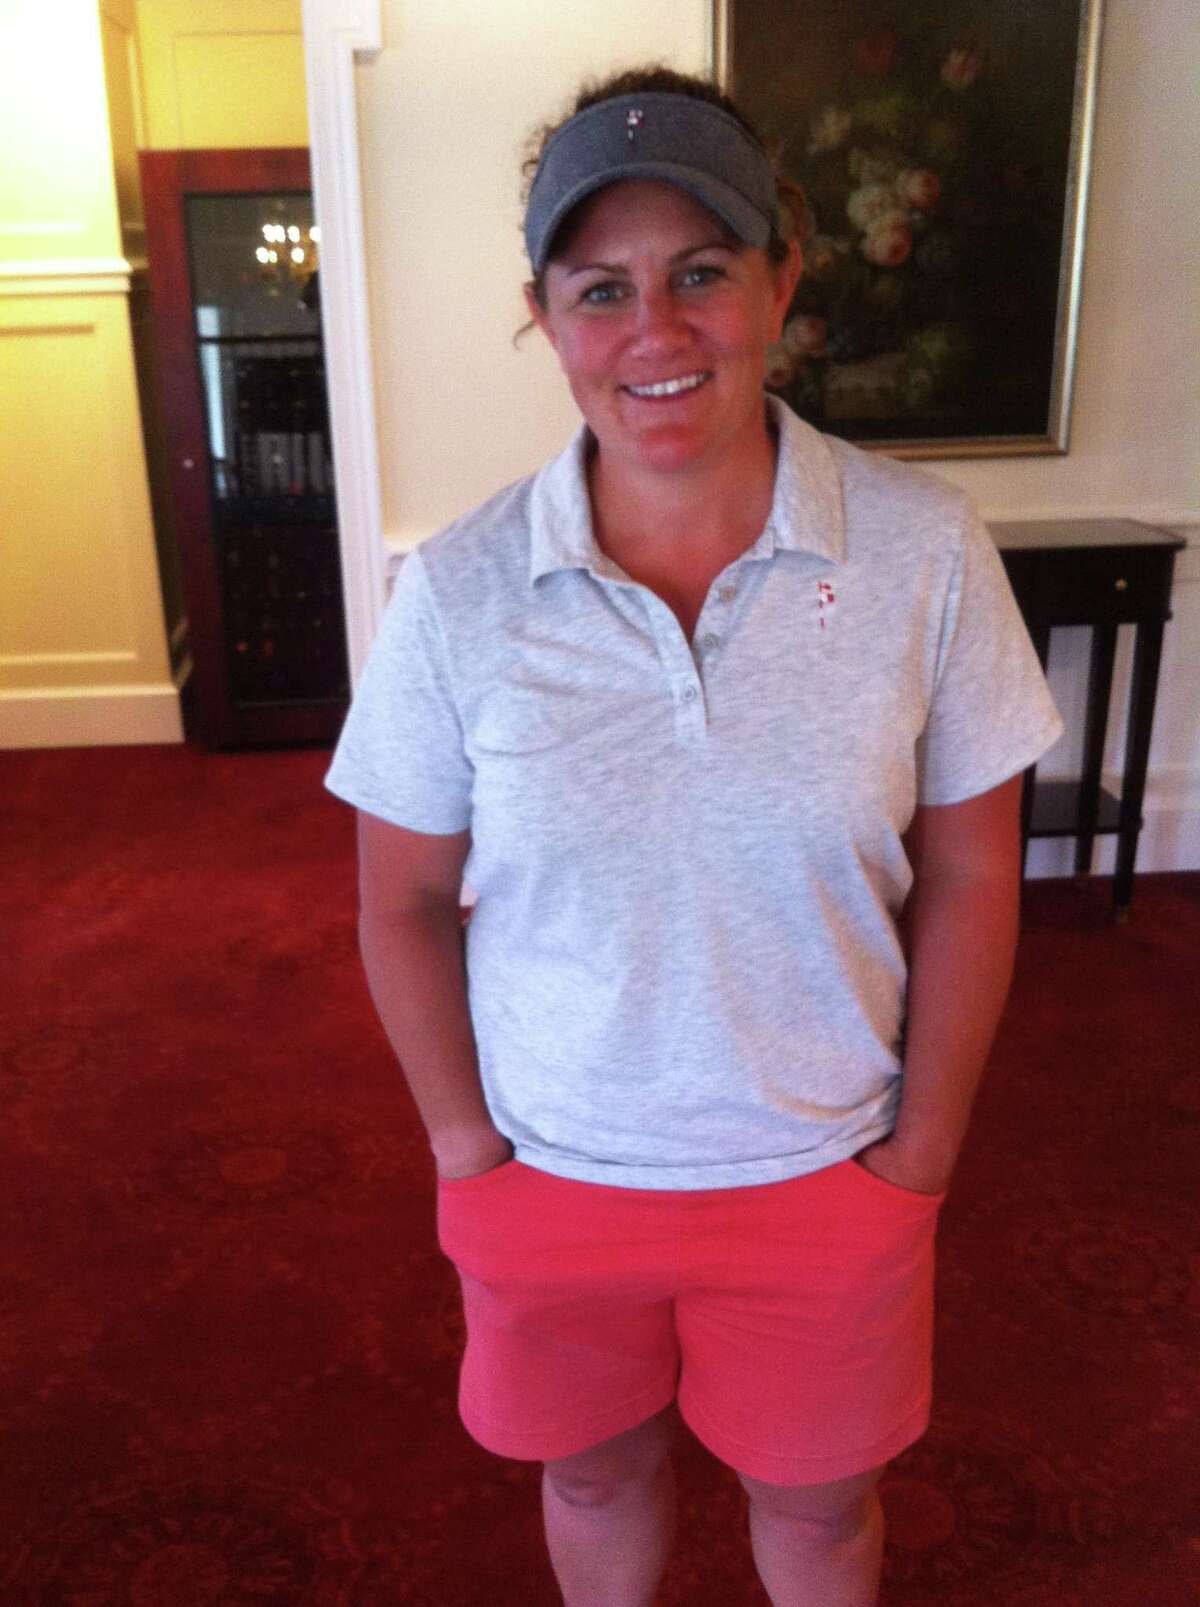 Becky McDaid won the Met PGA Women’s Stroke Play Championship on Monday at Innis Arden Golf Club.